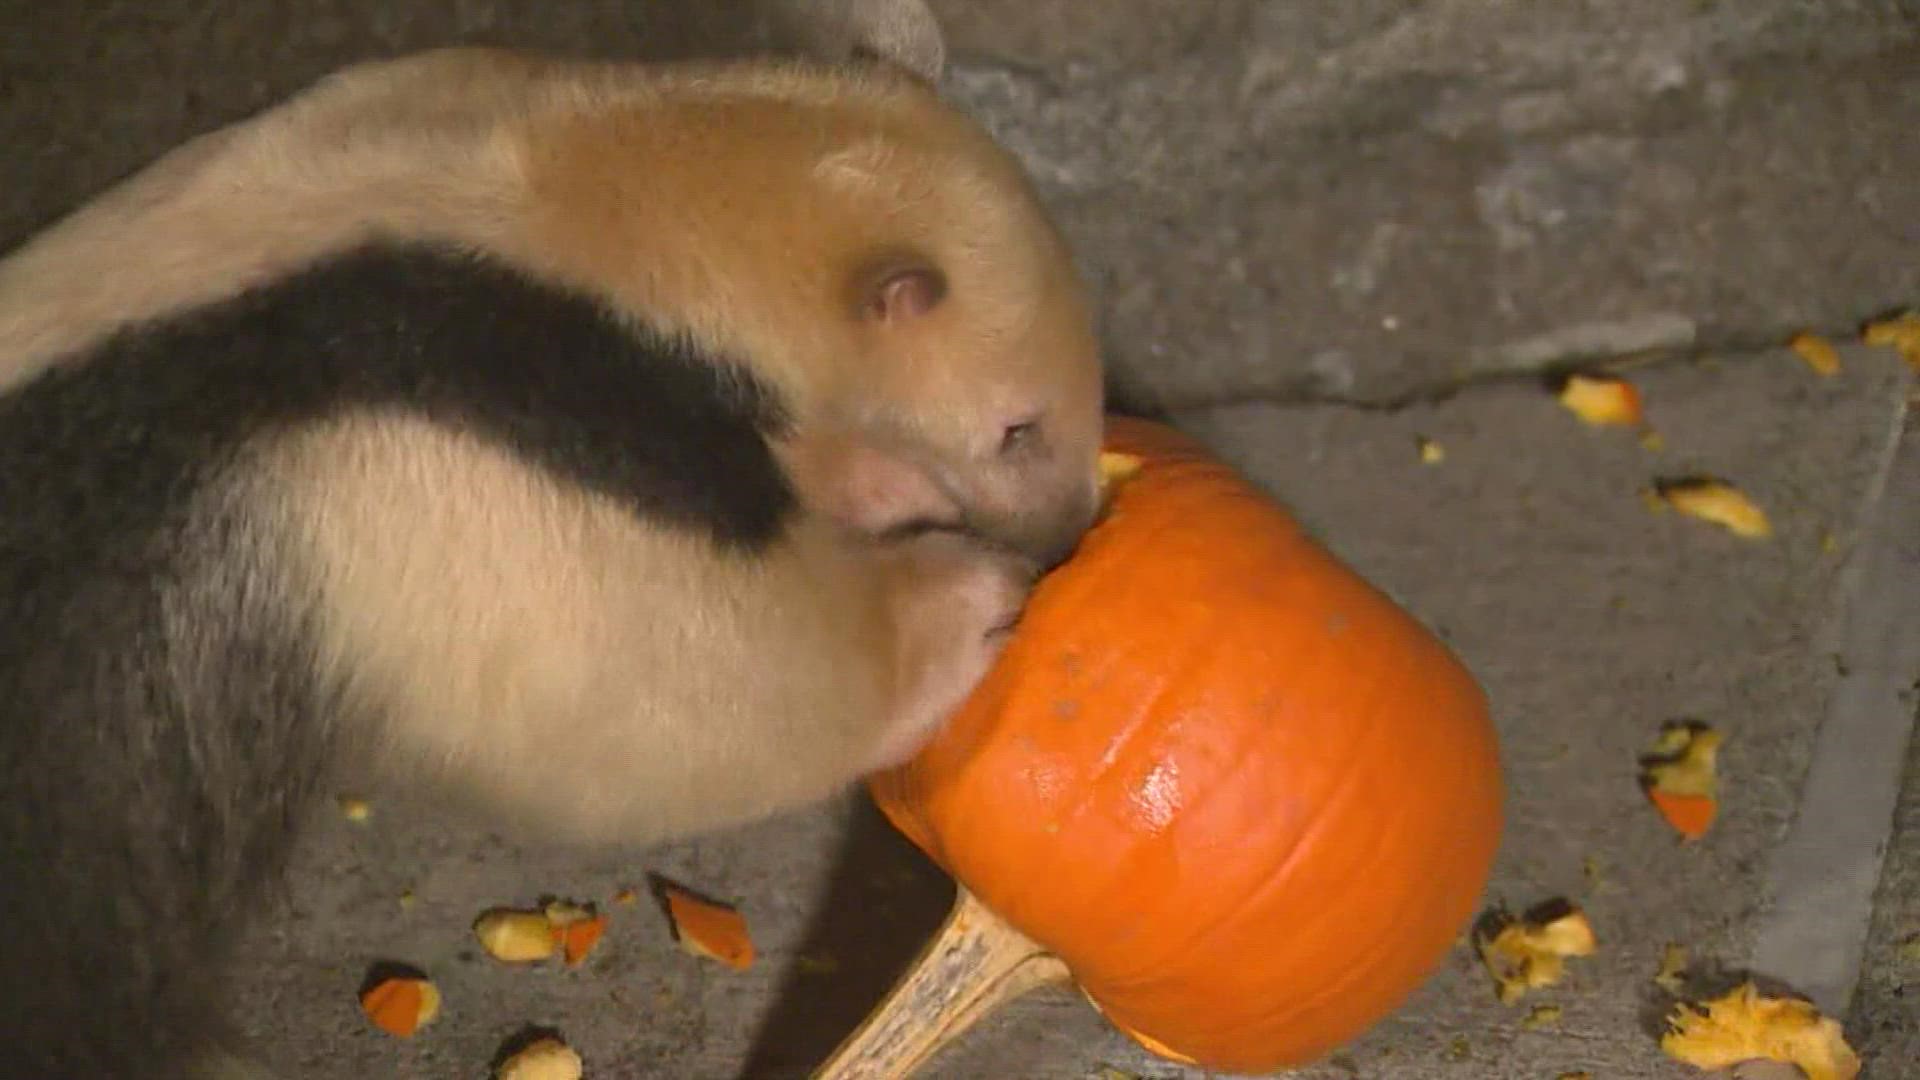 According to Point Defiance Zoo and Aquarium Biologist Sara Mattison, many zoo animals also enjoy pumpkins and it's actually good for their health.